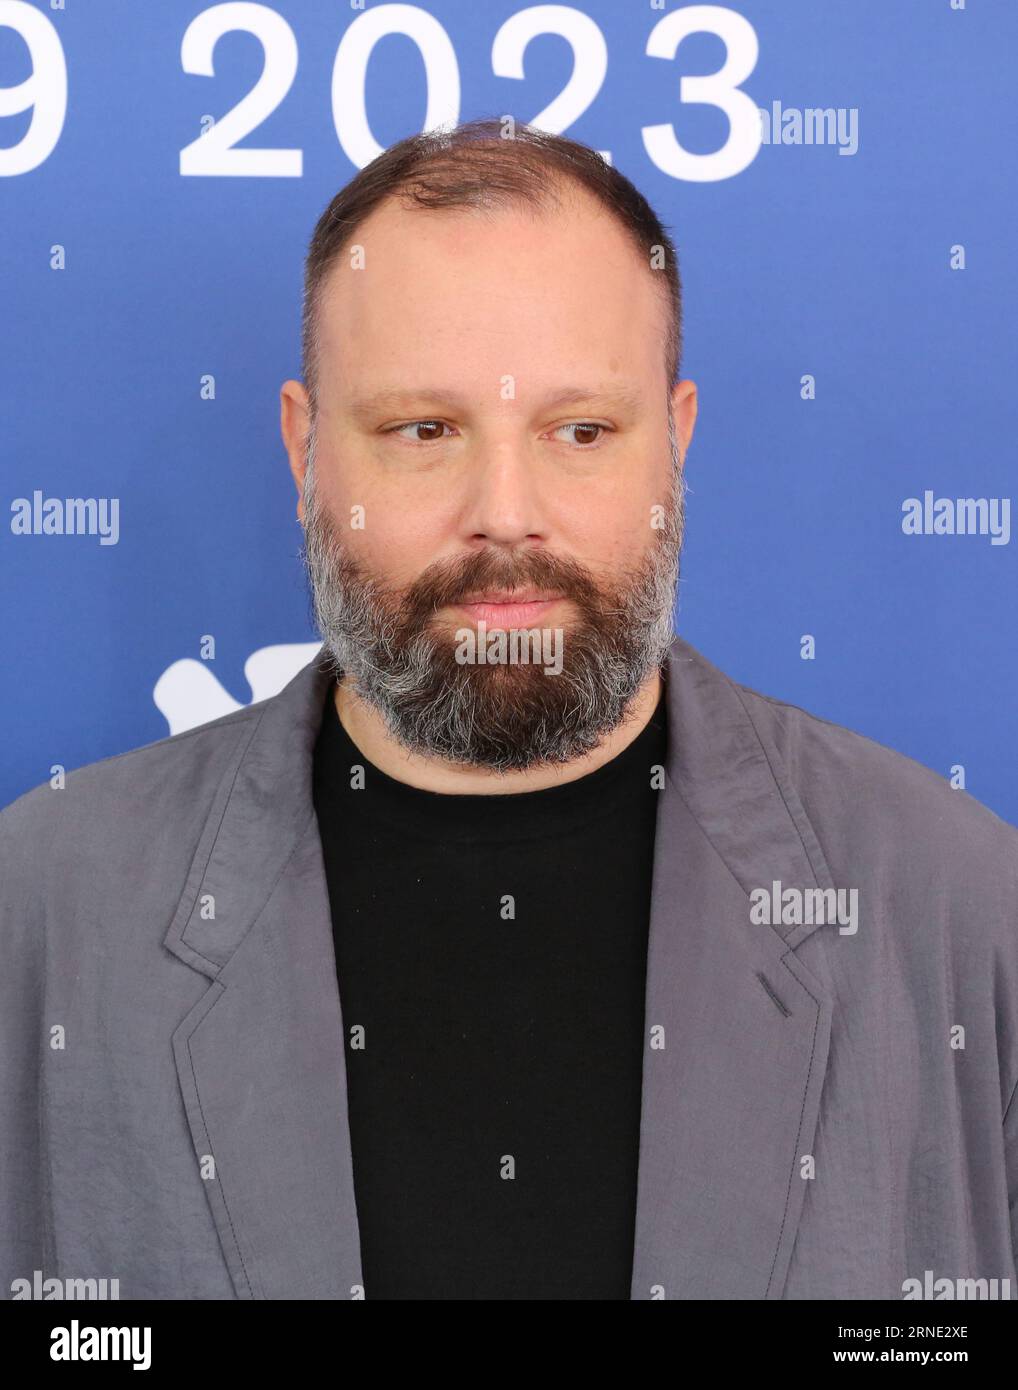 Venice, Italy, 1st September, 2023. Director Yorgos Lanthimos at the photo call for the film Poor Things at the 80th Venice International Film Festival. Photo Credit: Doreen Kennedy / Alamy Live News. Stock Photo